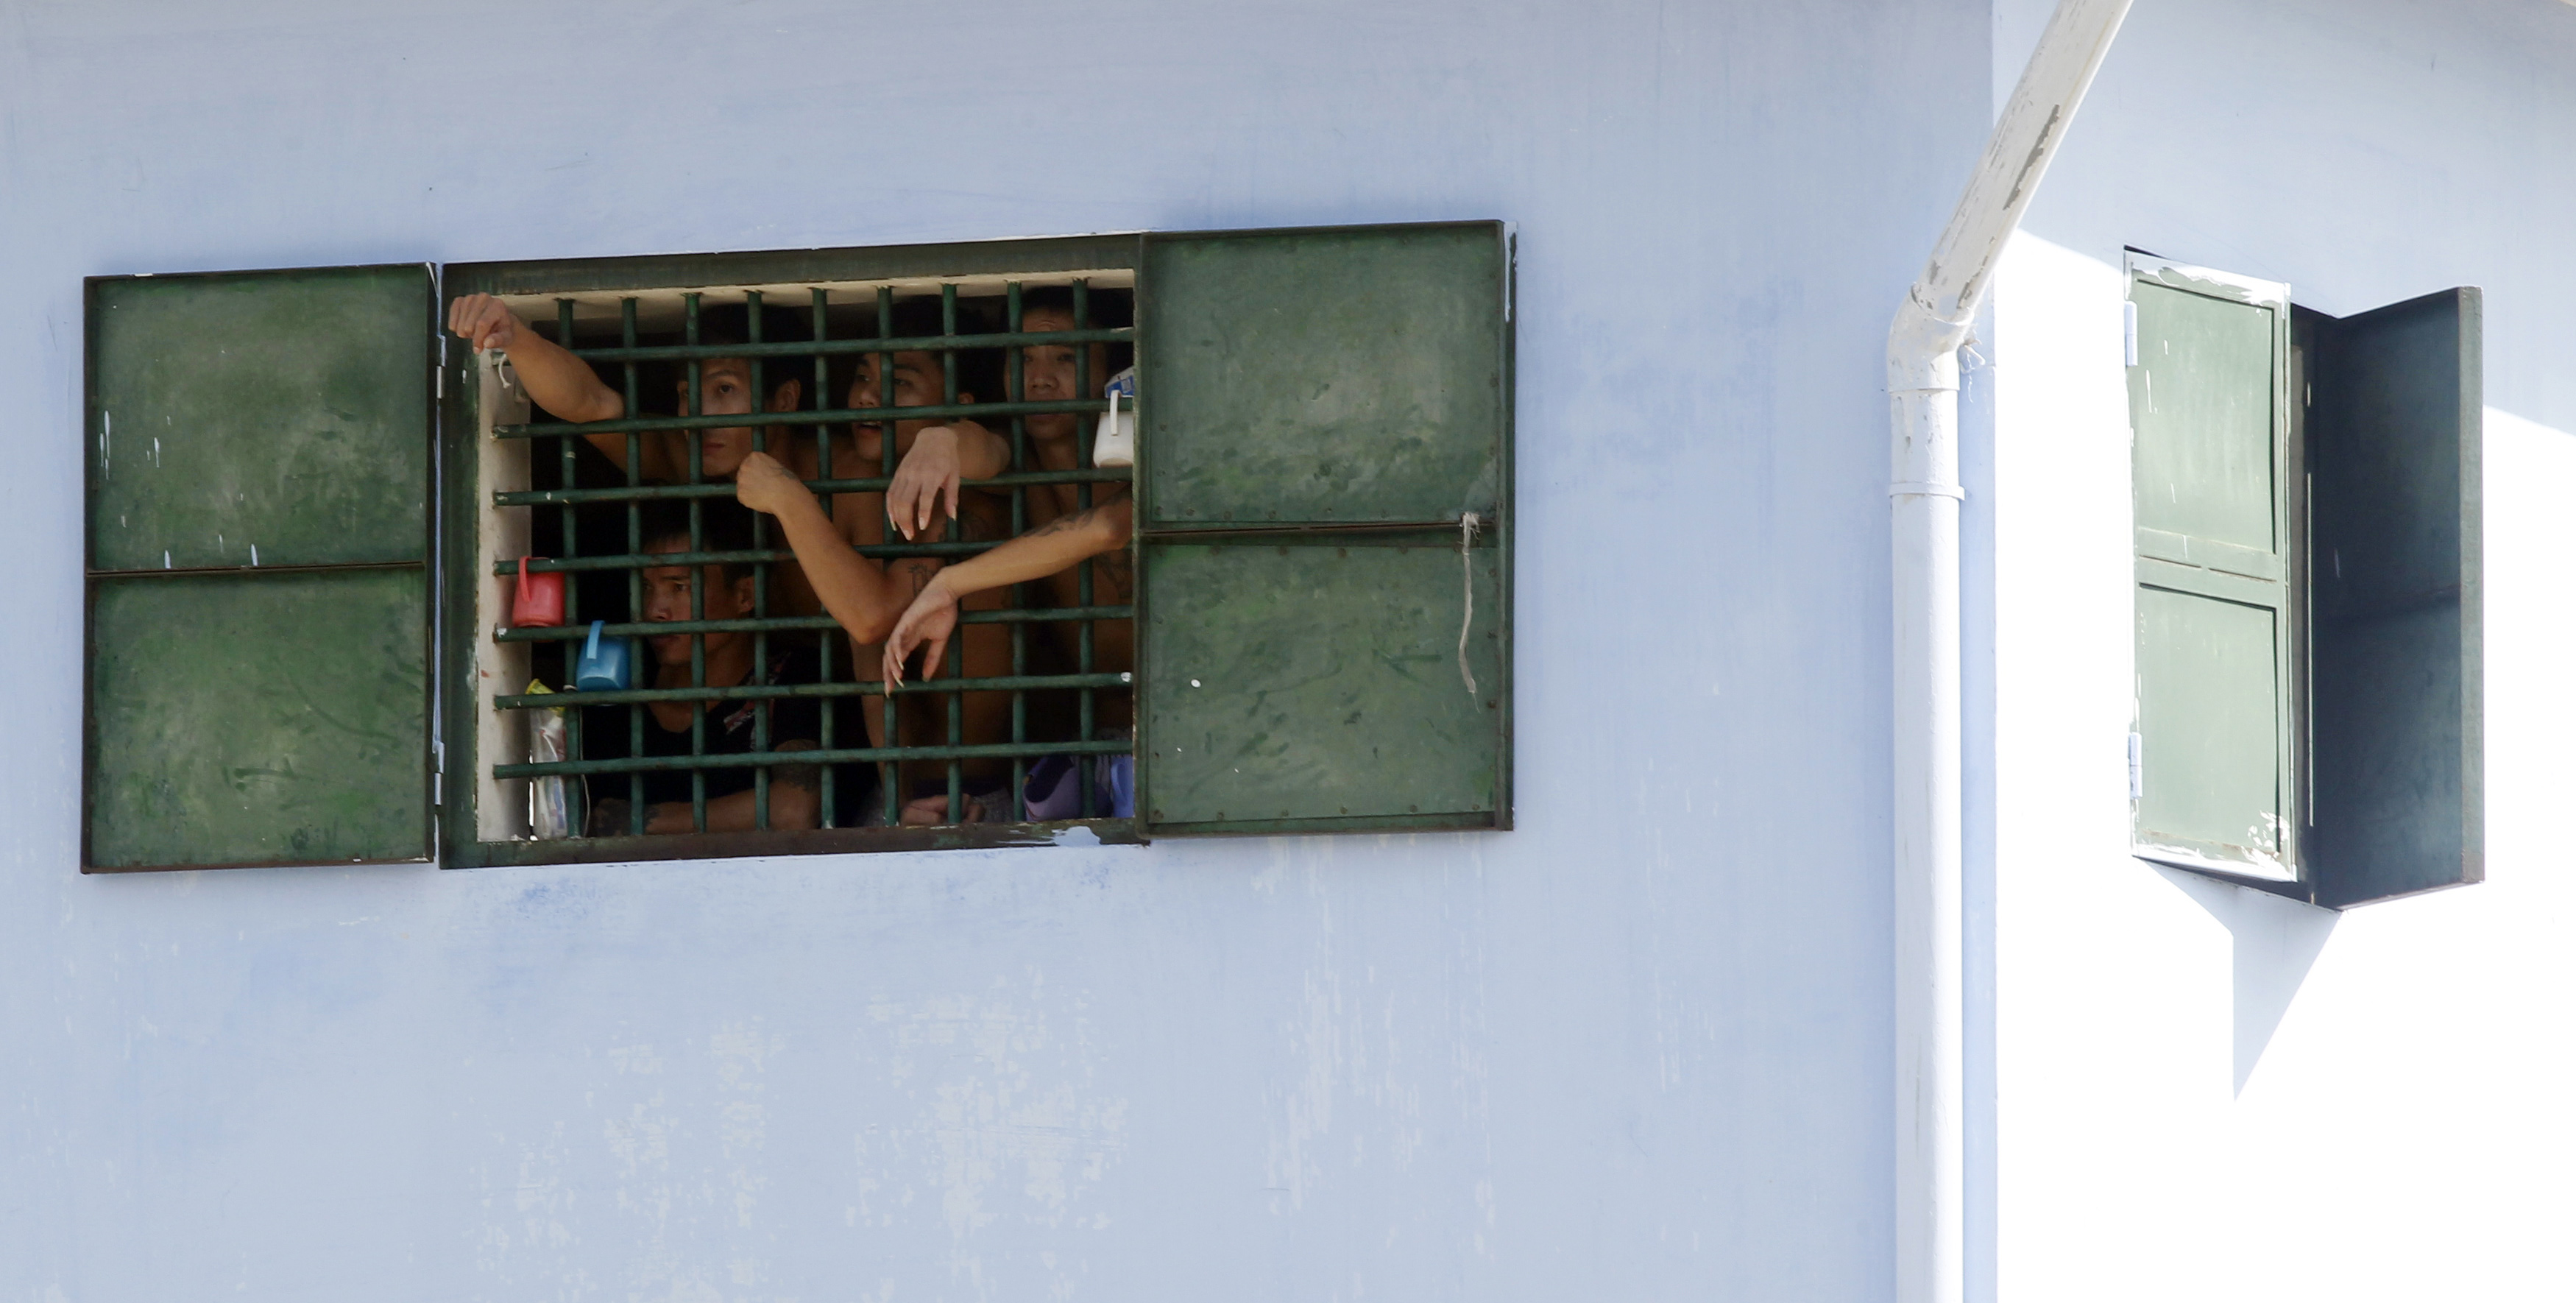 Inmates look on from behind a barred window of a cell as they wave to released inmates at Hoang Tien prison outside Hanoi on Aug. 30, 2013 (Nguyen Huy Kham—Reuters)